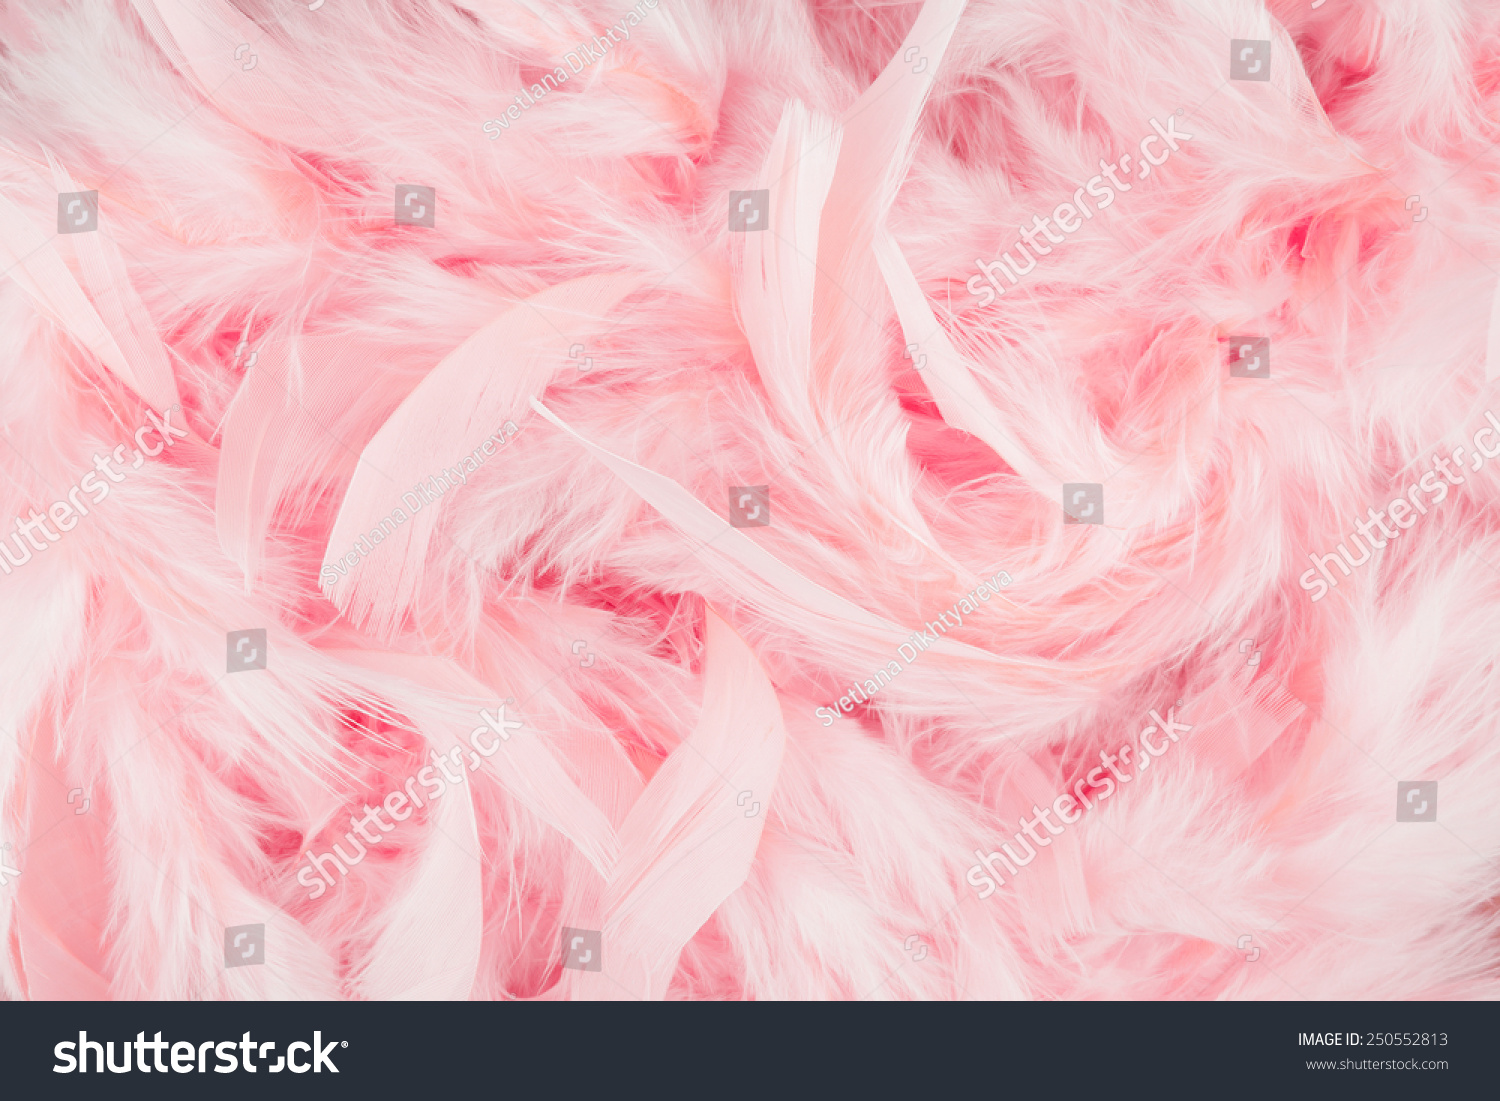 Pink Feathers Background Stock Photo 250552813 - Shutterstock